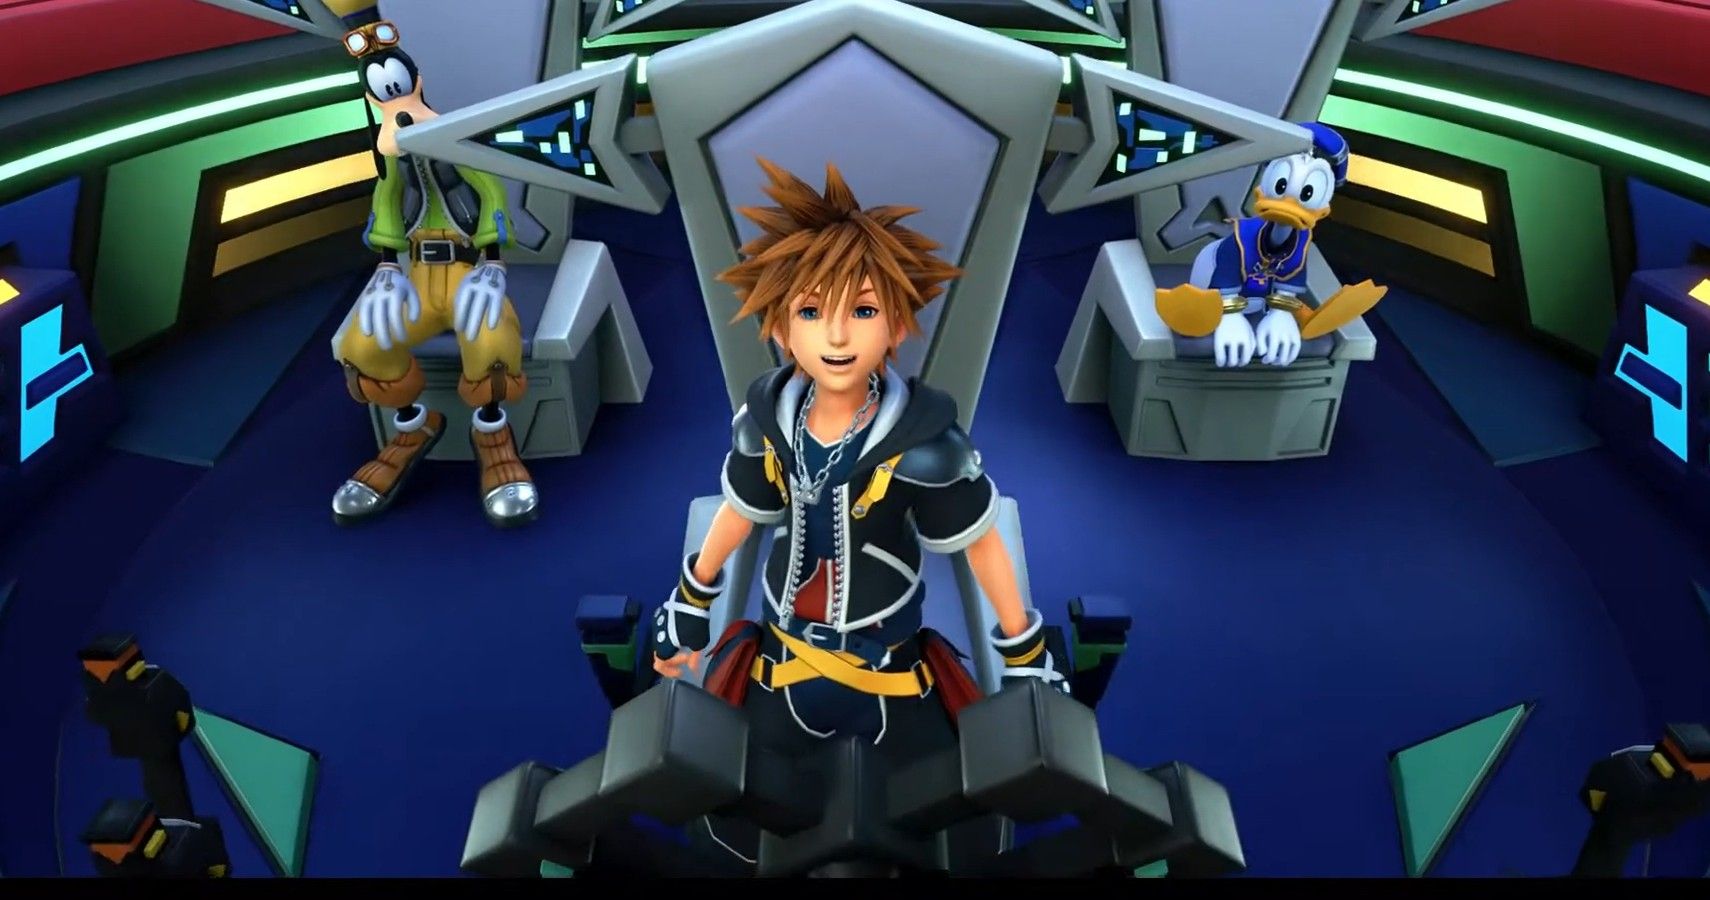 Kingdom Hearts 3 Tips - Controls, What Do You Desire, Choices